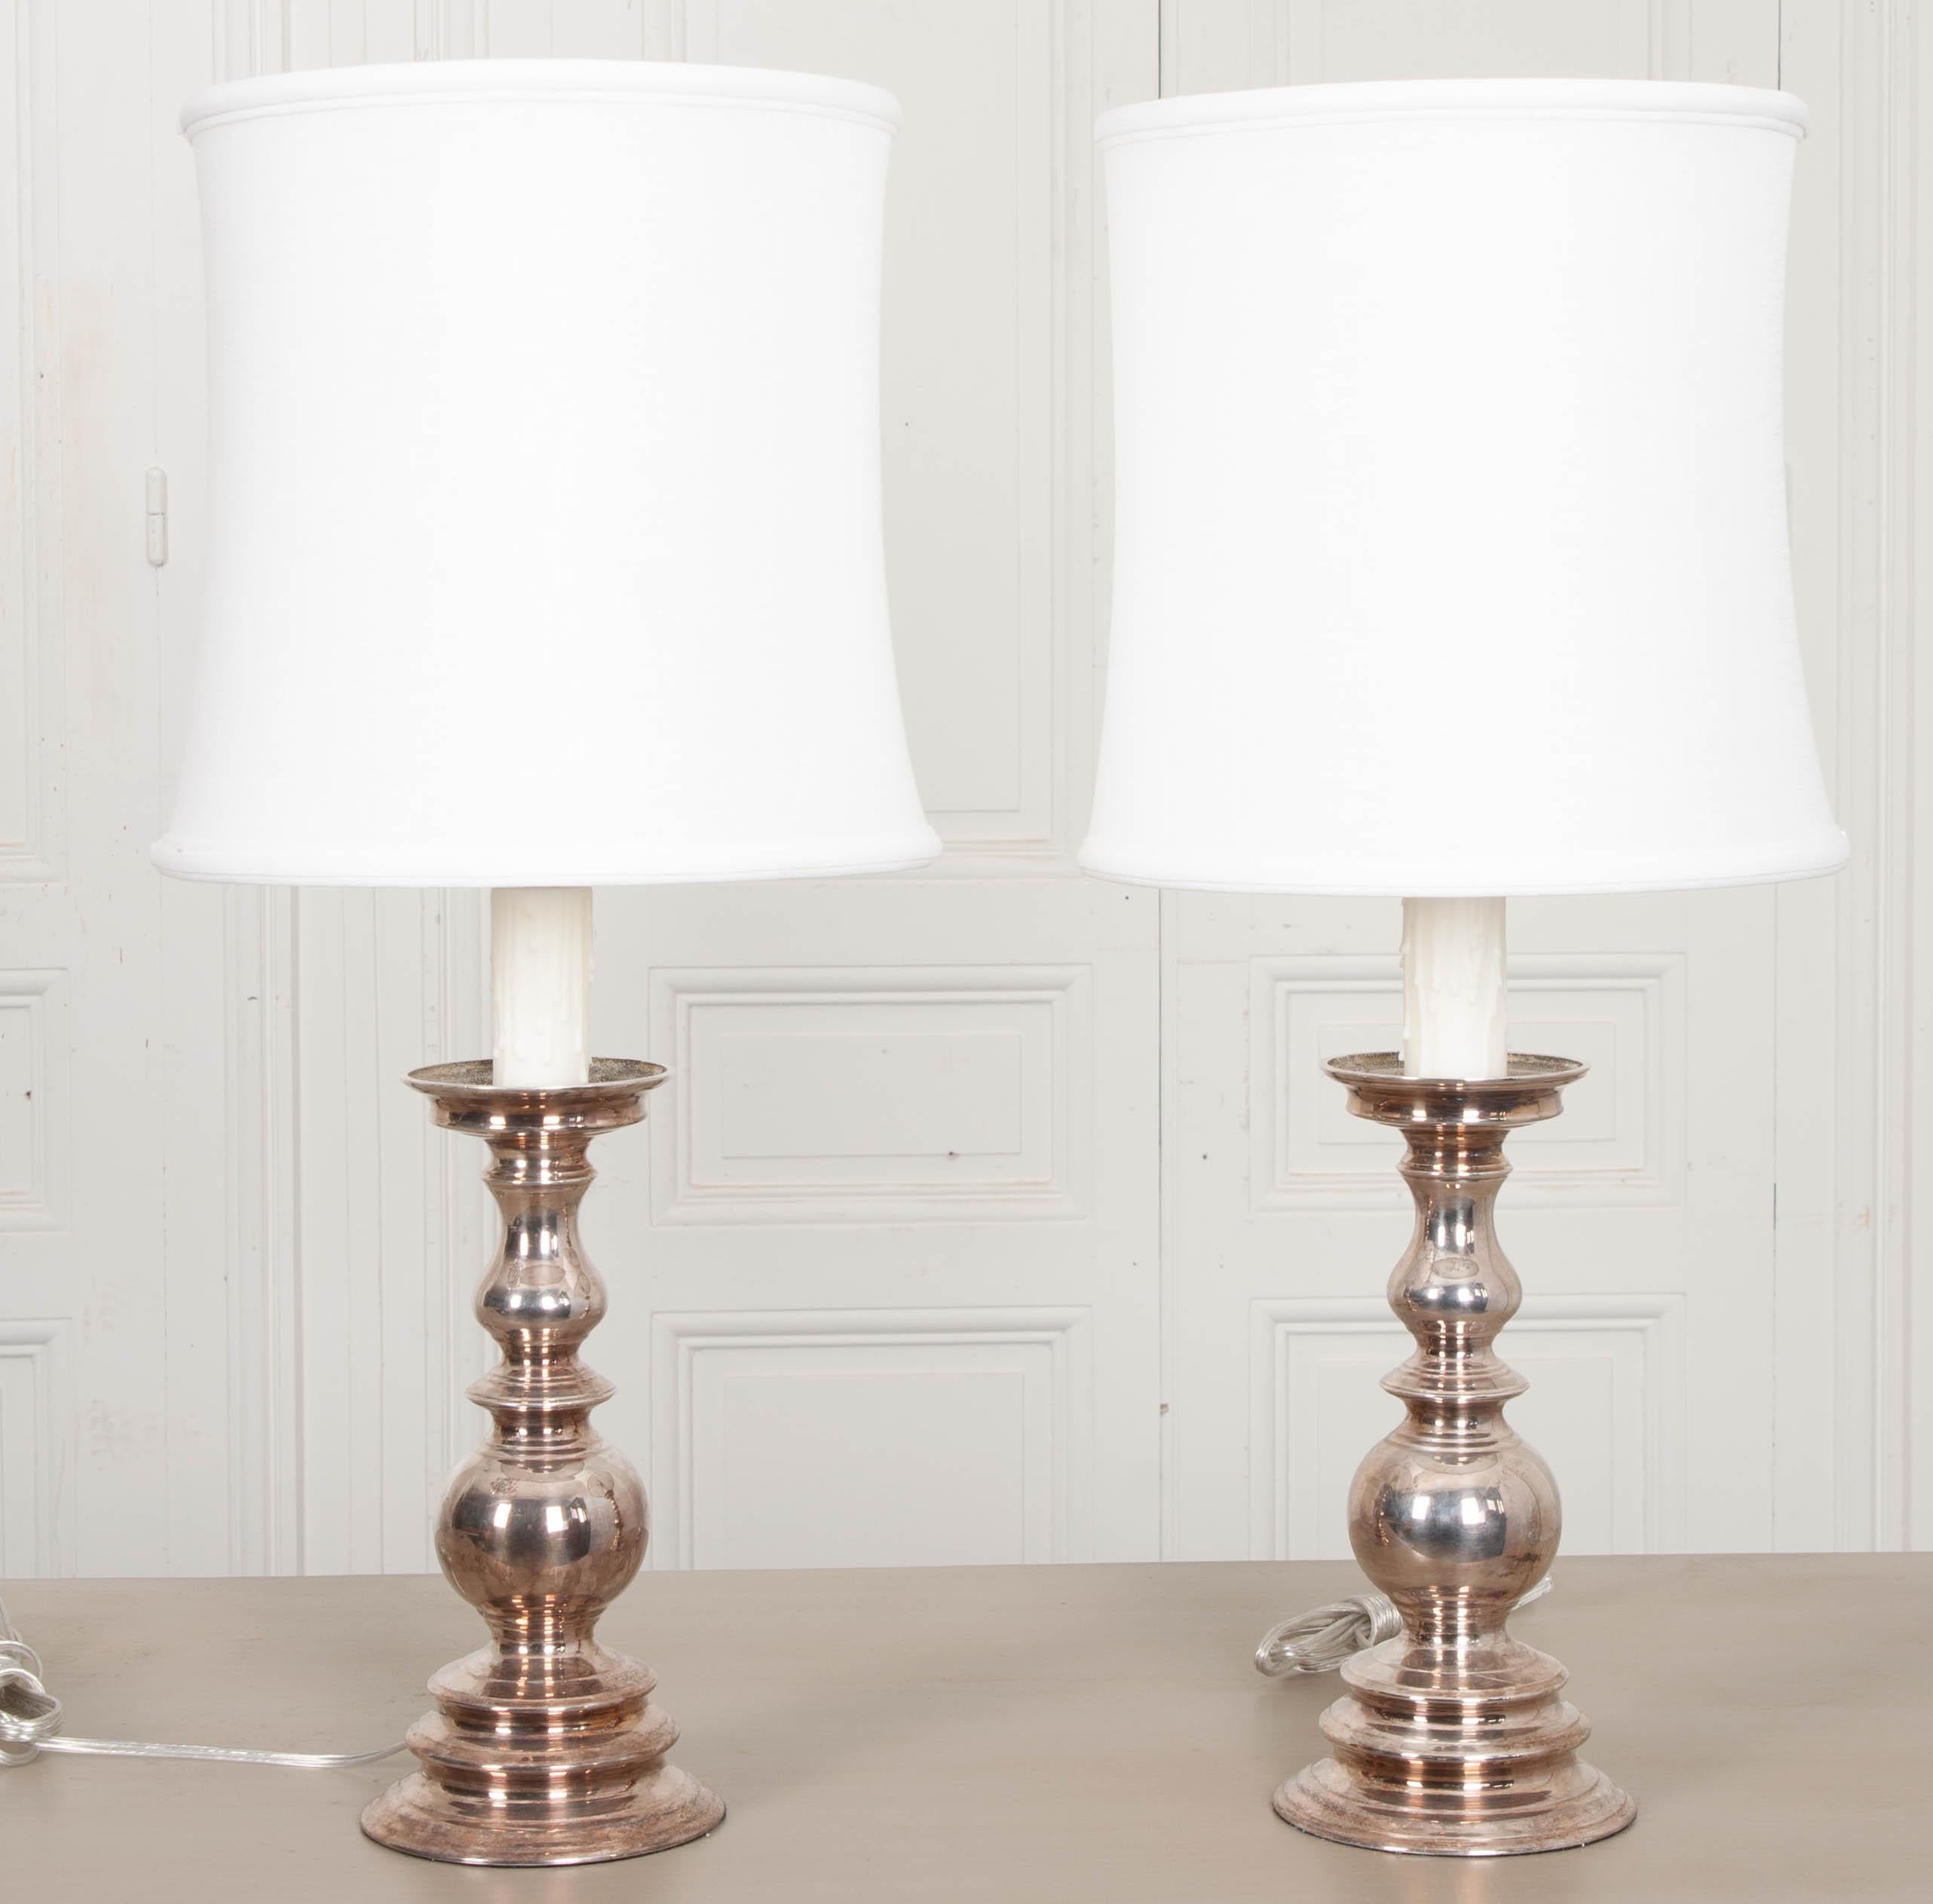 A lovely pair of candlestick-form table lamps, with bases plated in silver. The traditionally-styled duo radiate elegance without a piddling vestige of grandiloquence or pomposity. Included are two white linen, corset-form drum shades. Cleaned and